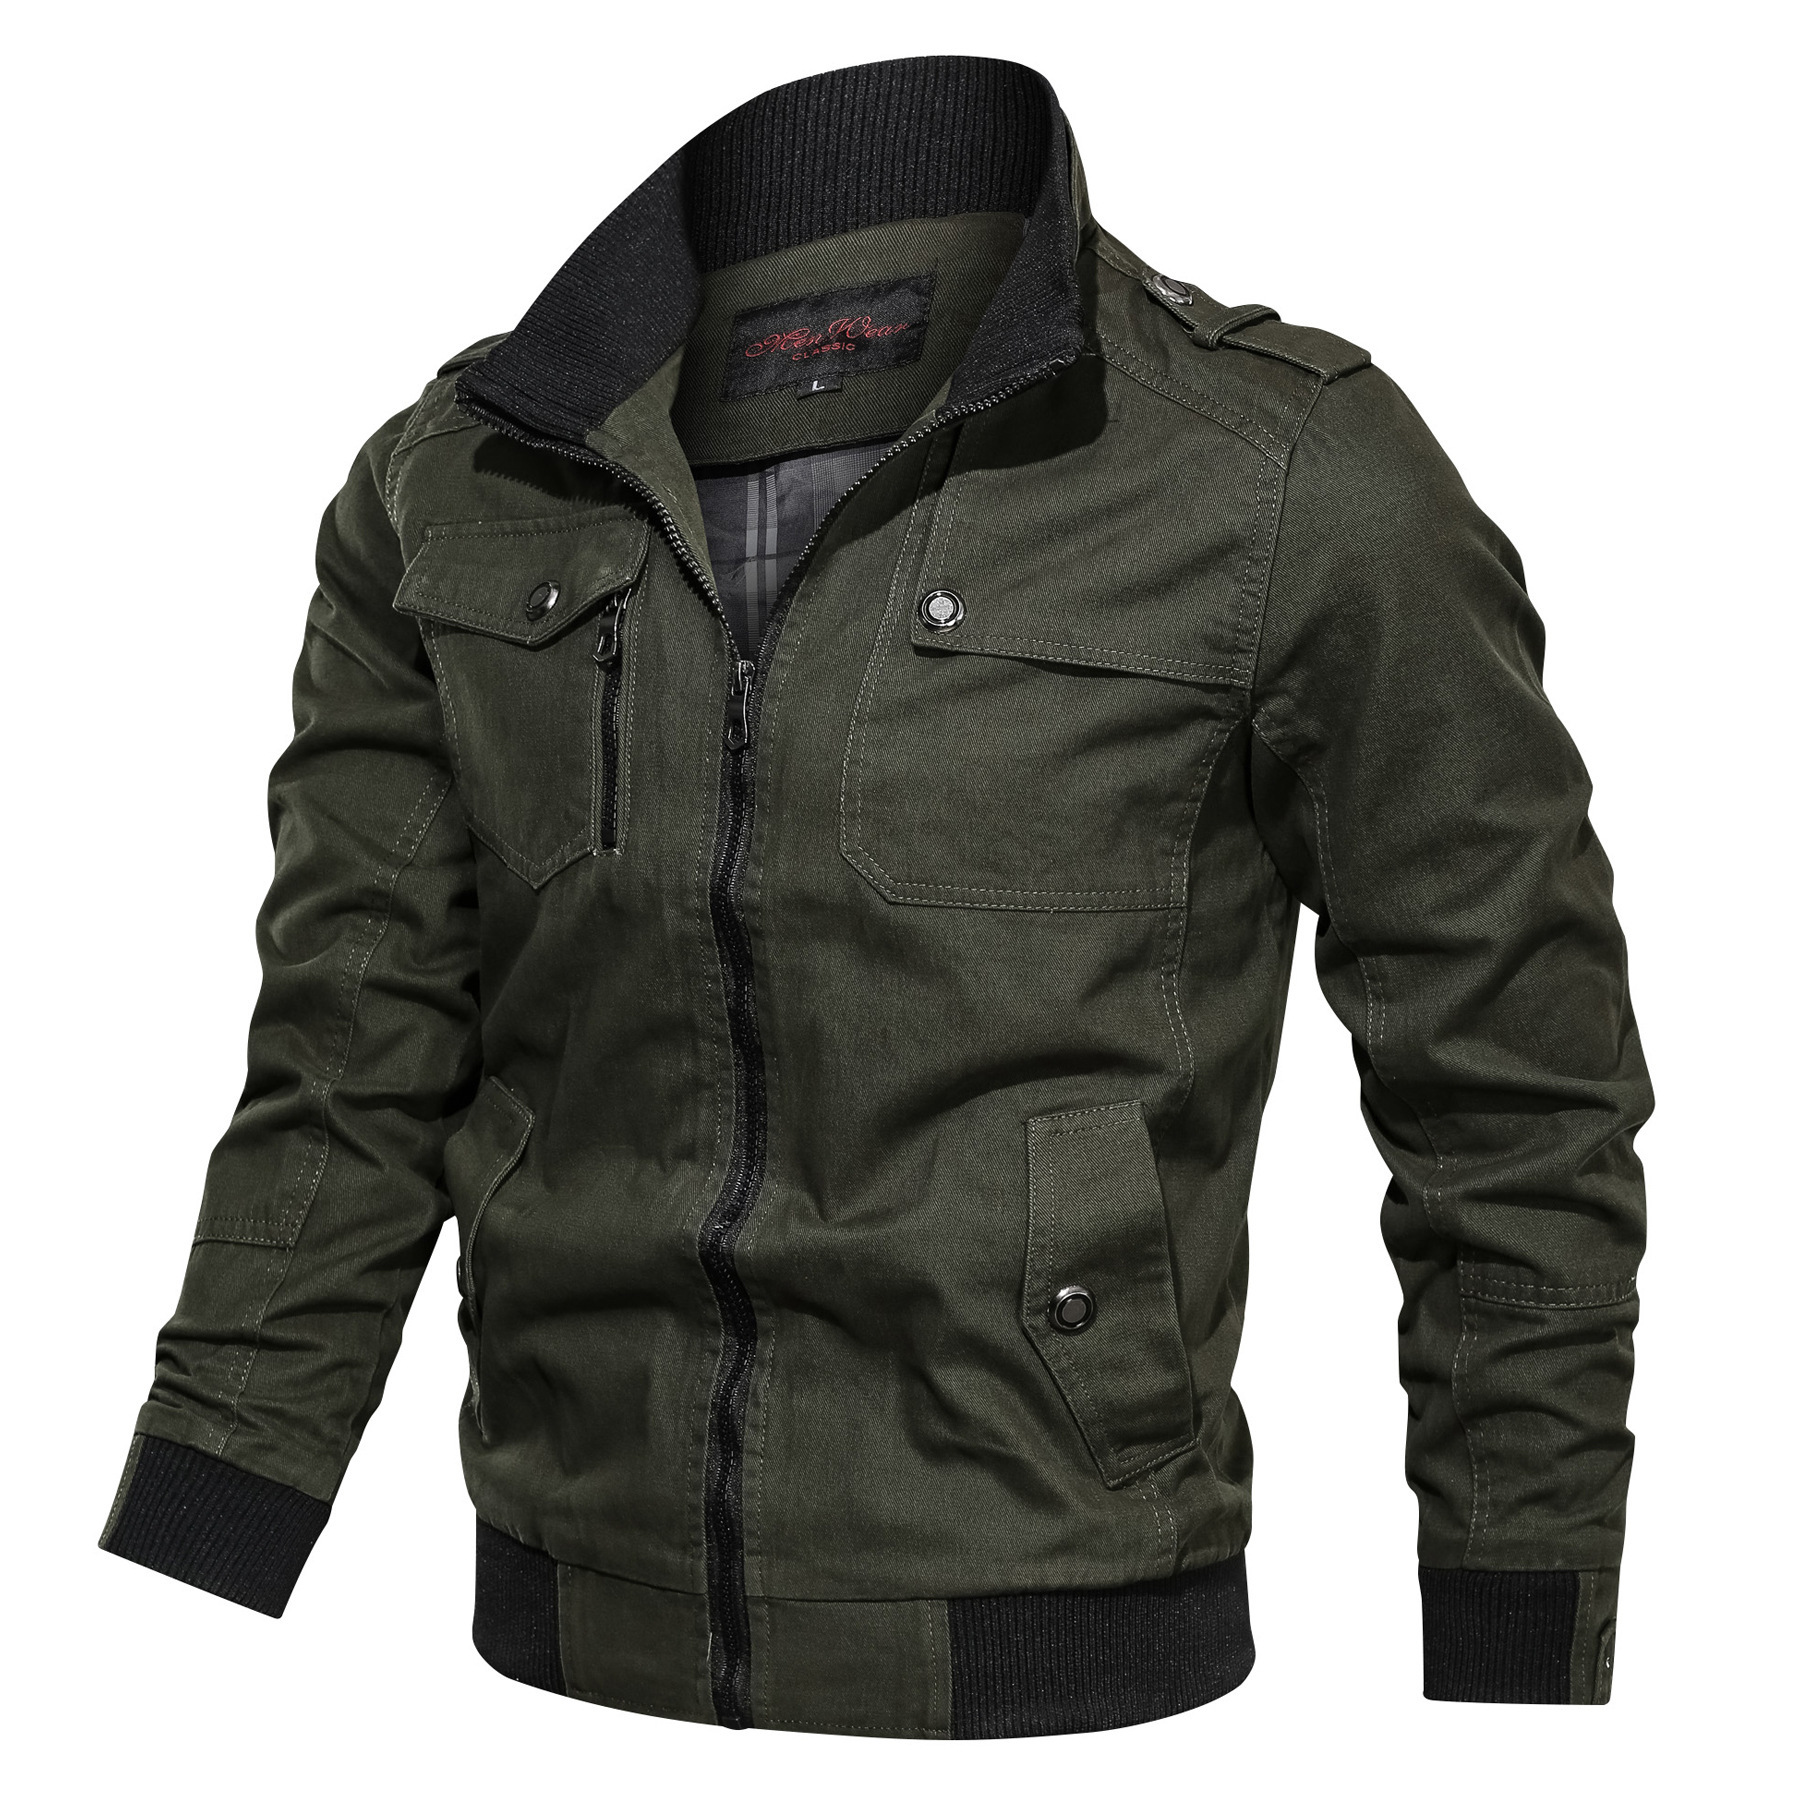 Mens outdoor cotton sports jacket